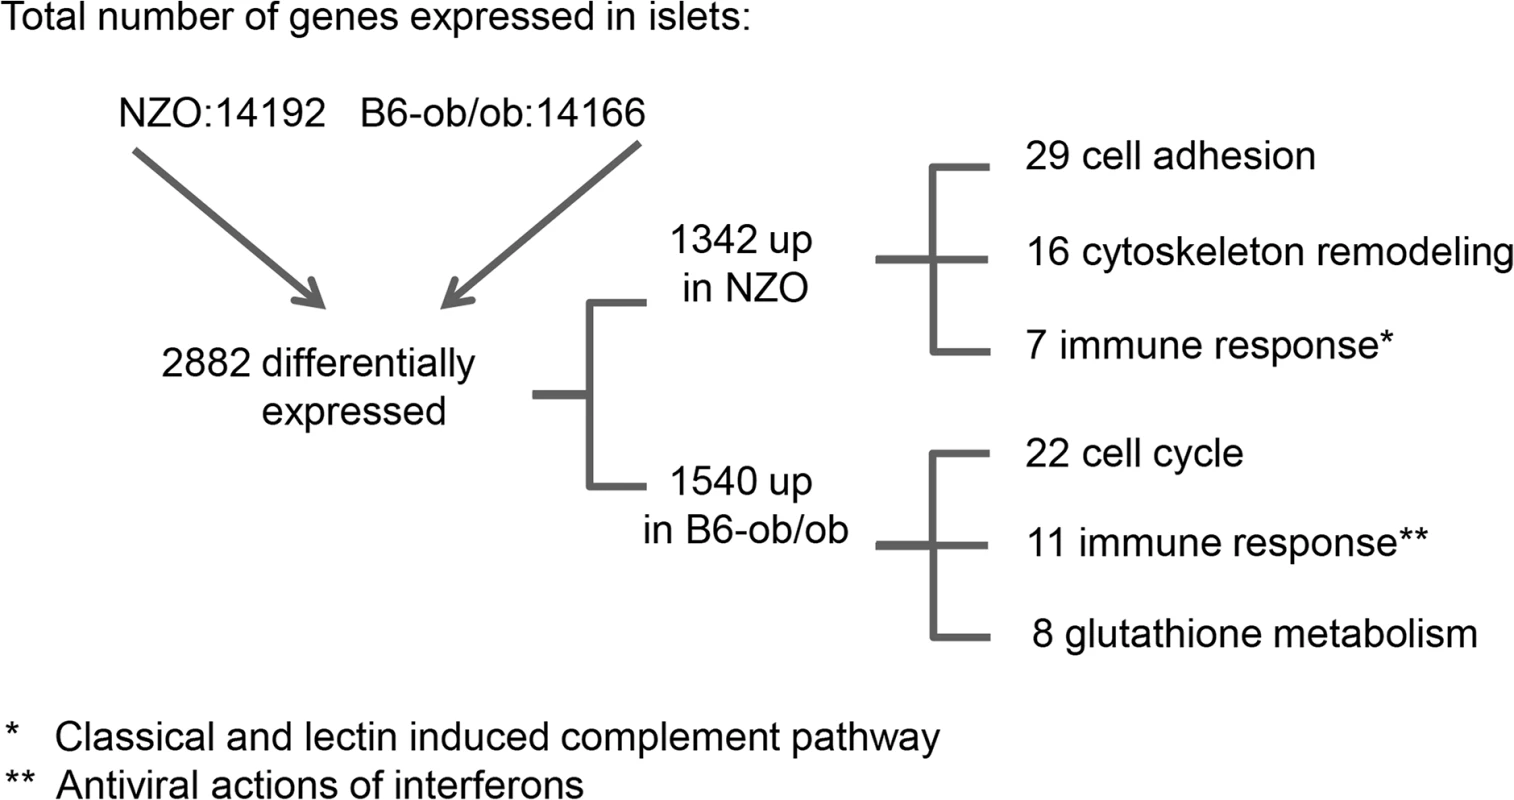 Beta-cell failure in NZO mice is associated with a modulation of cell adhesion whereas B6-ob/ob mice are protected against diabetes due to an induction of beta-cell cycle.